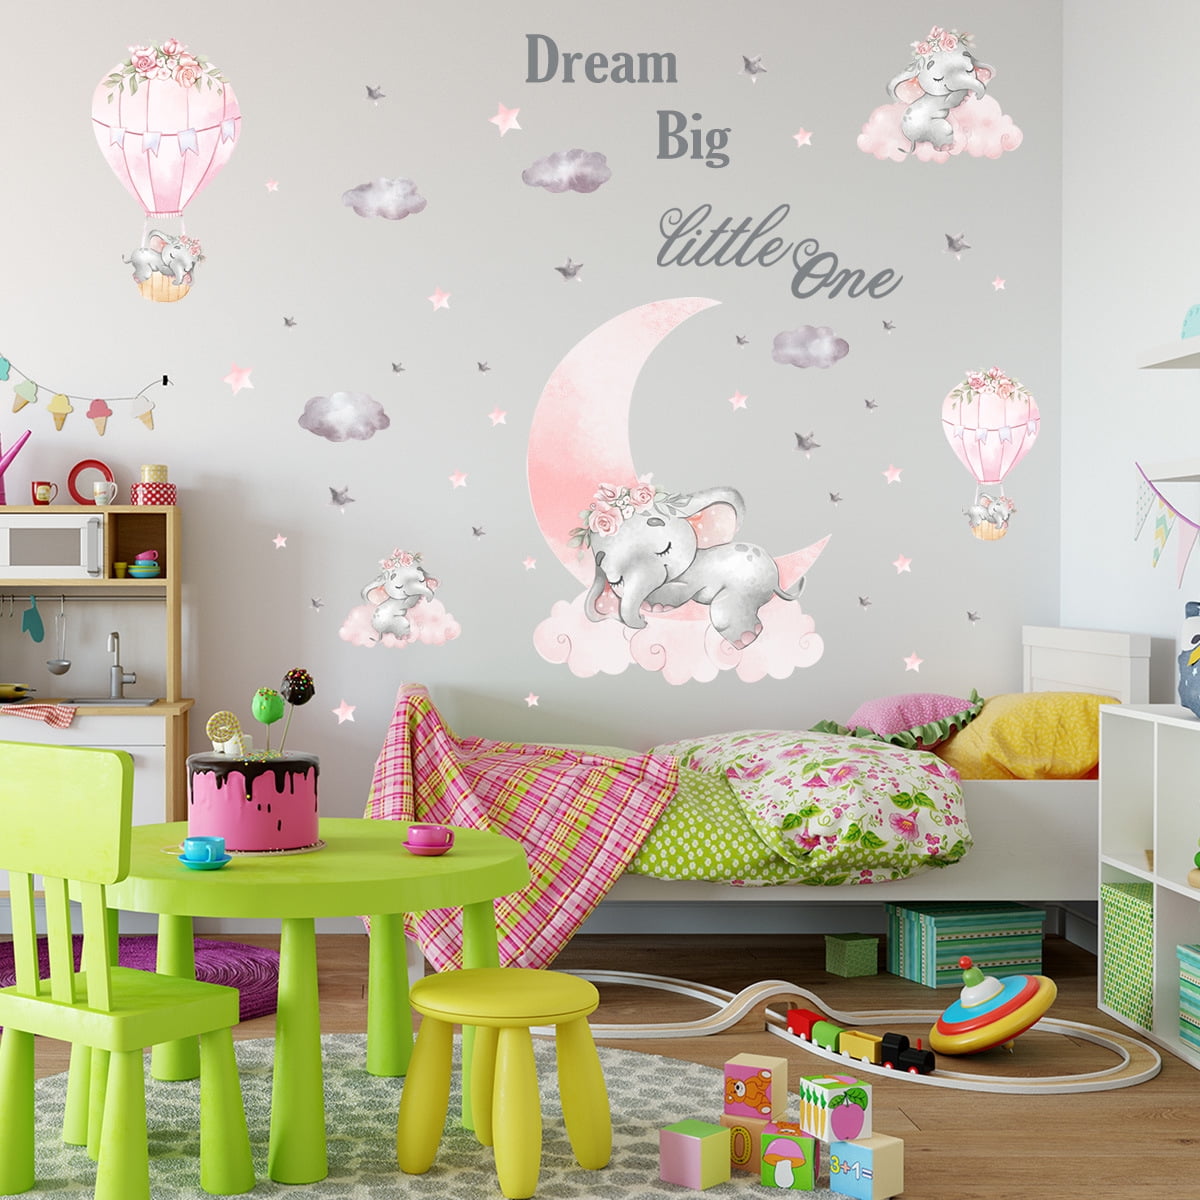 Details about   Full moon wall stickerSpace themed wall stickersWall decals 